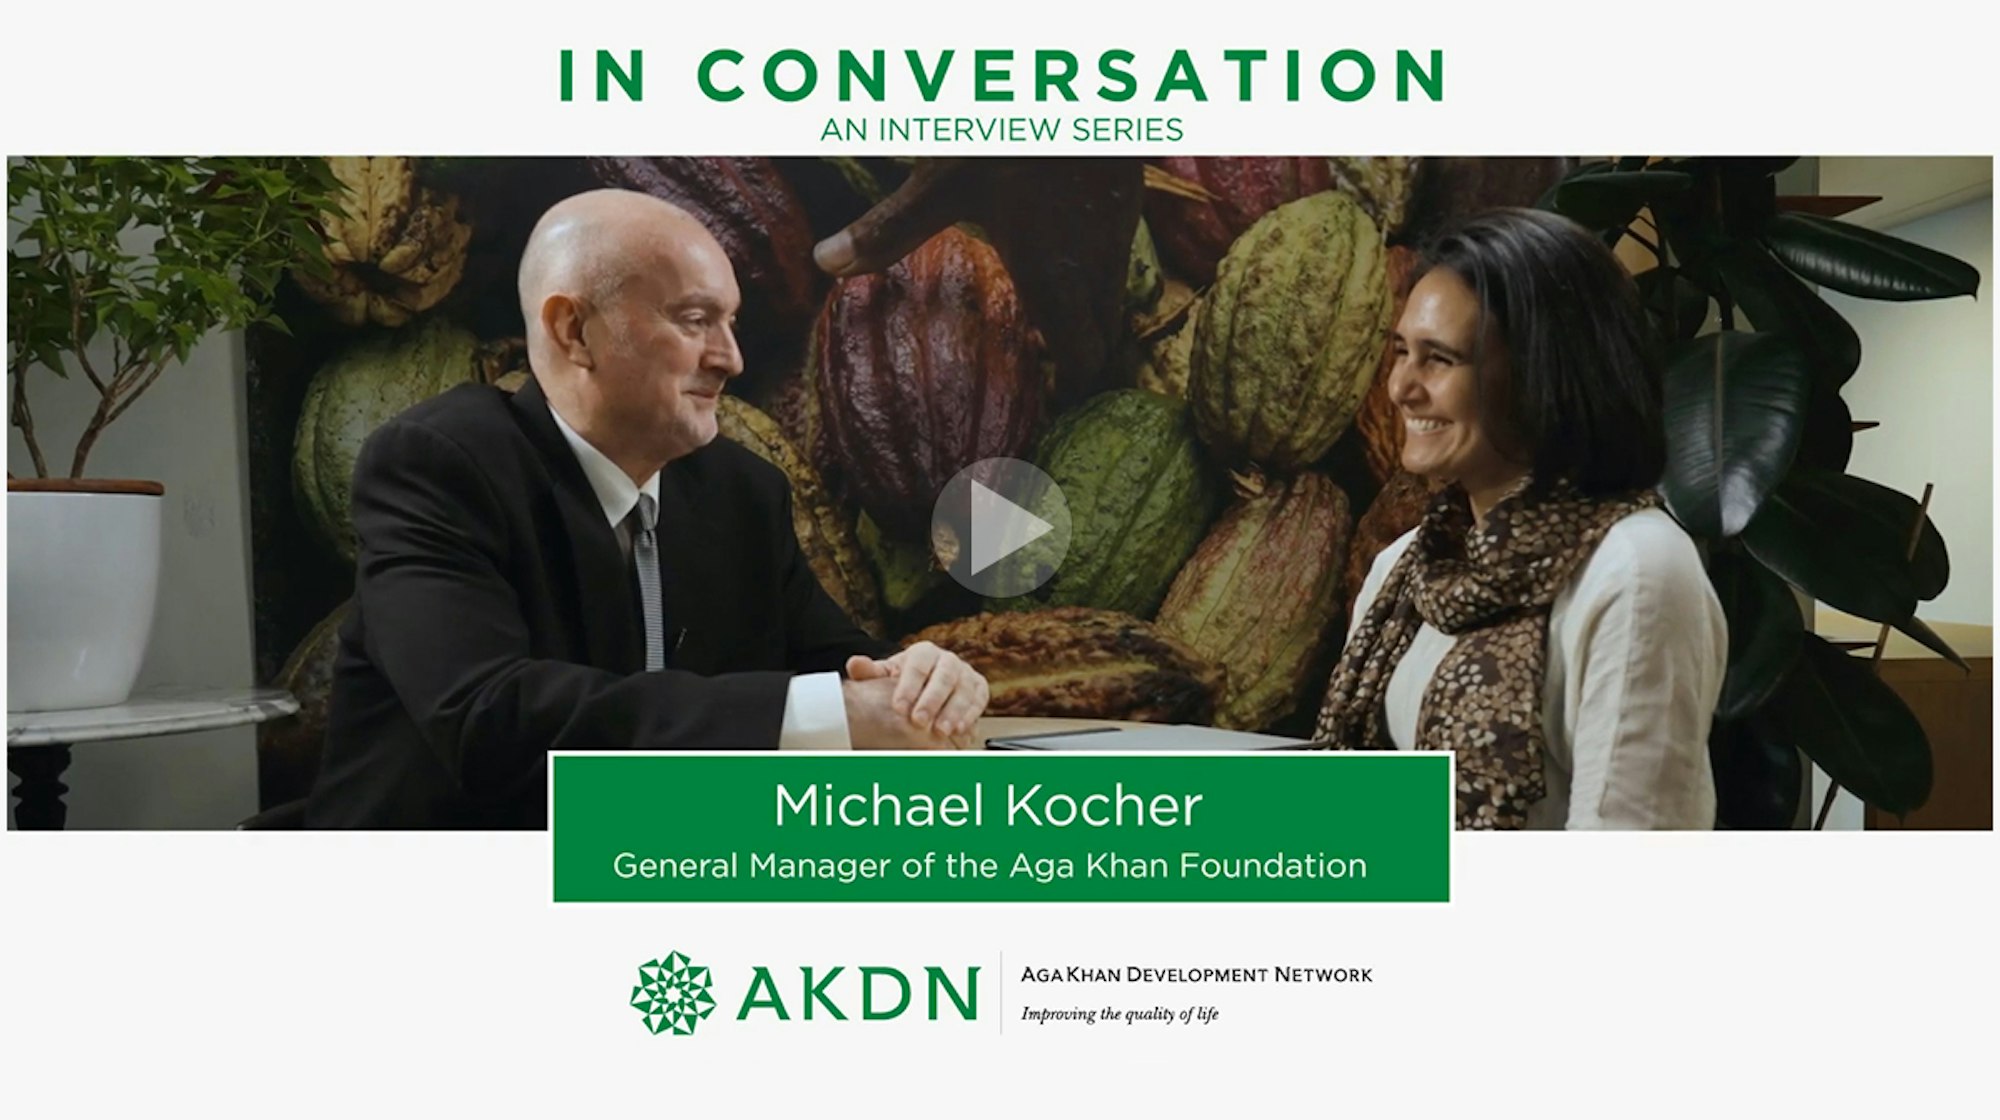 In conversation with Michael Kocher